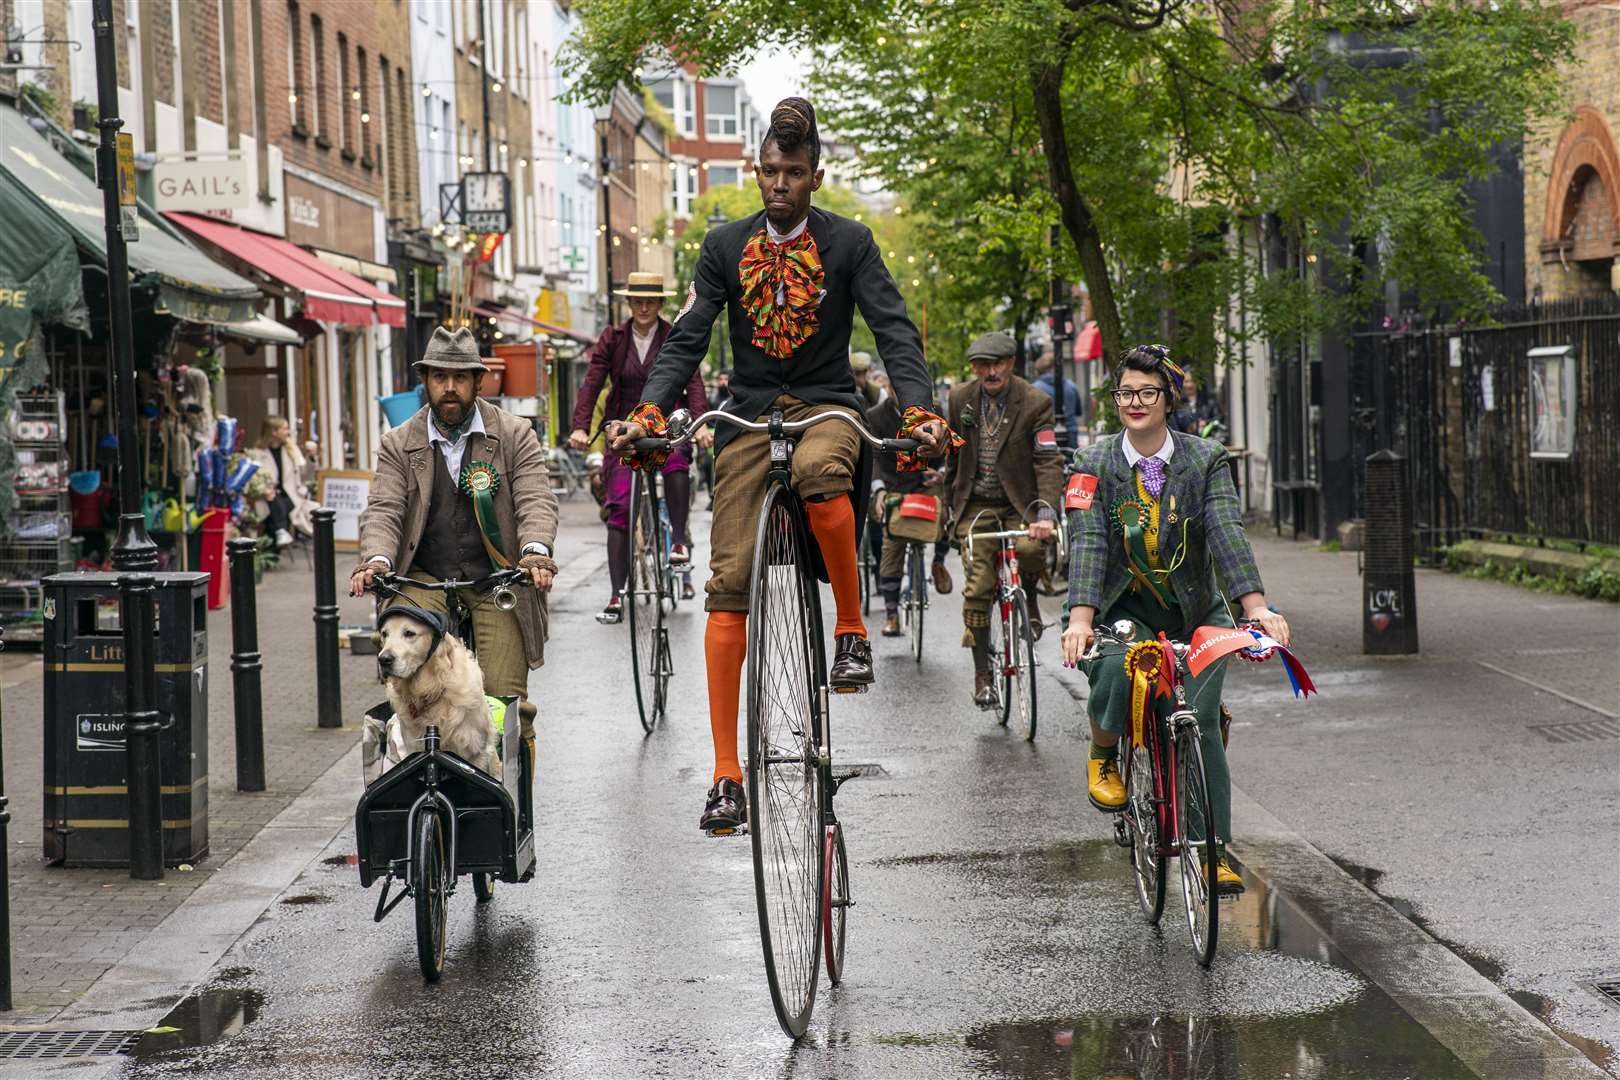 One cyclist donned a stylish outfit as he rode through London (Jeff Moore/PA)